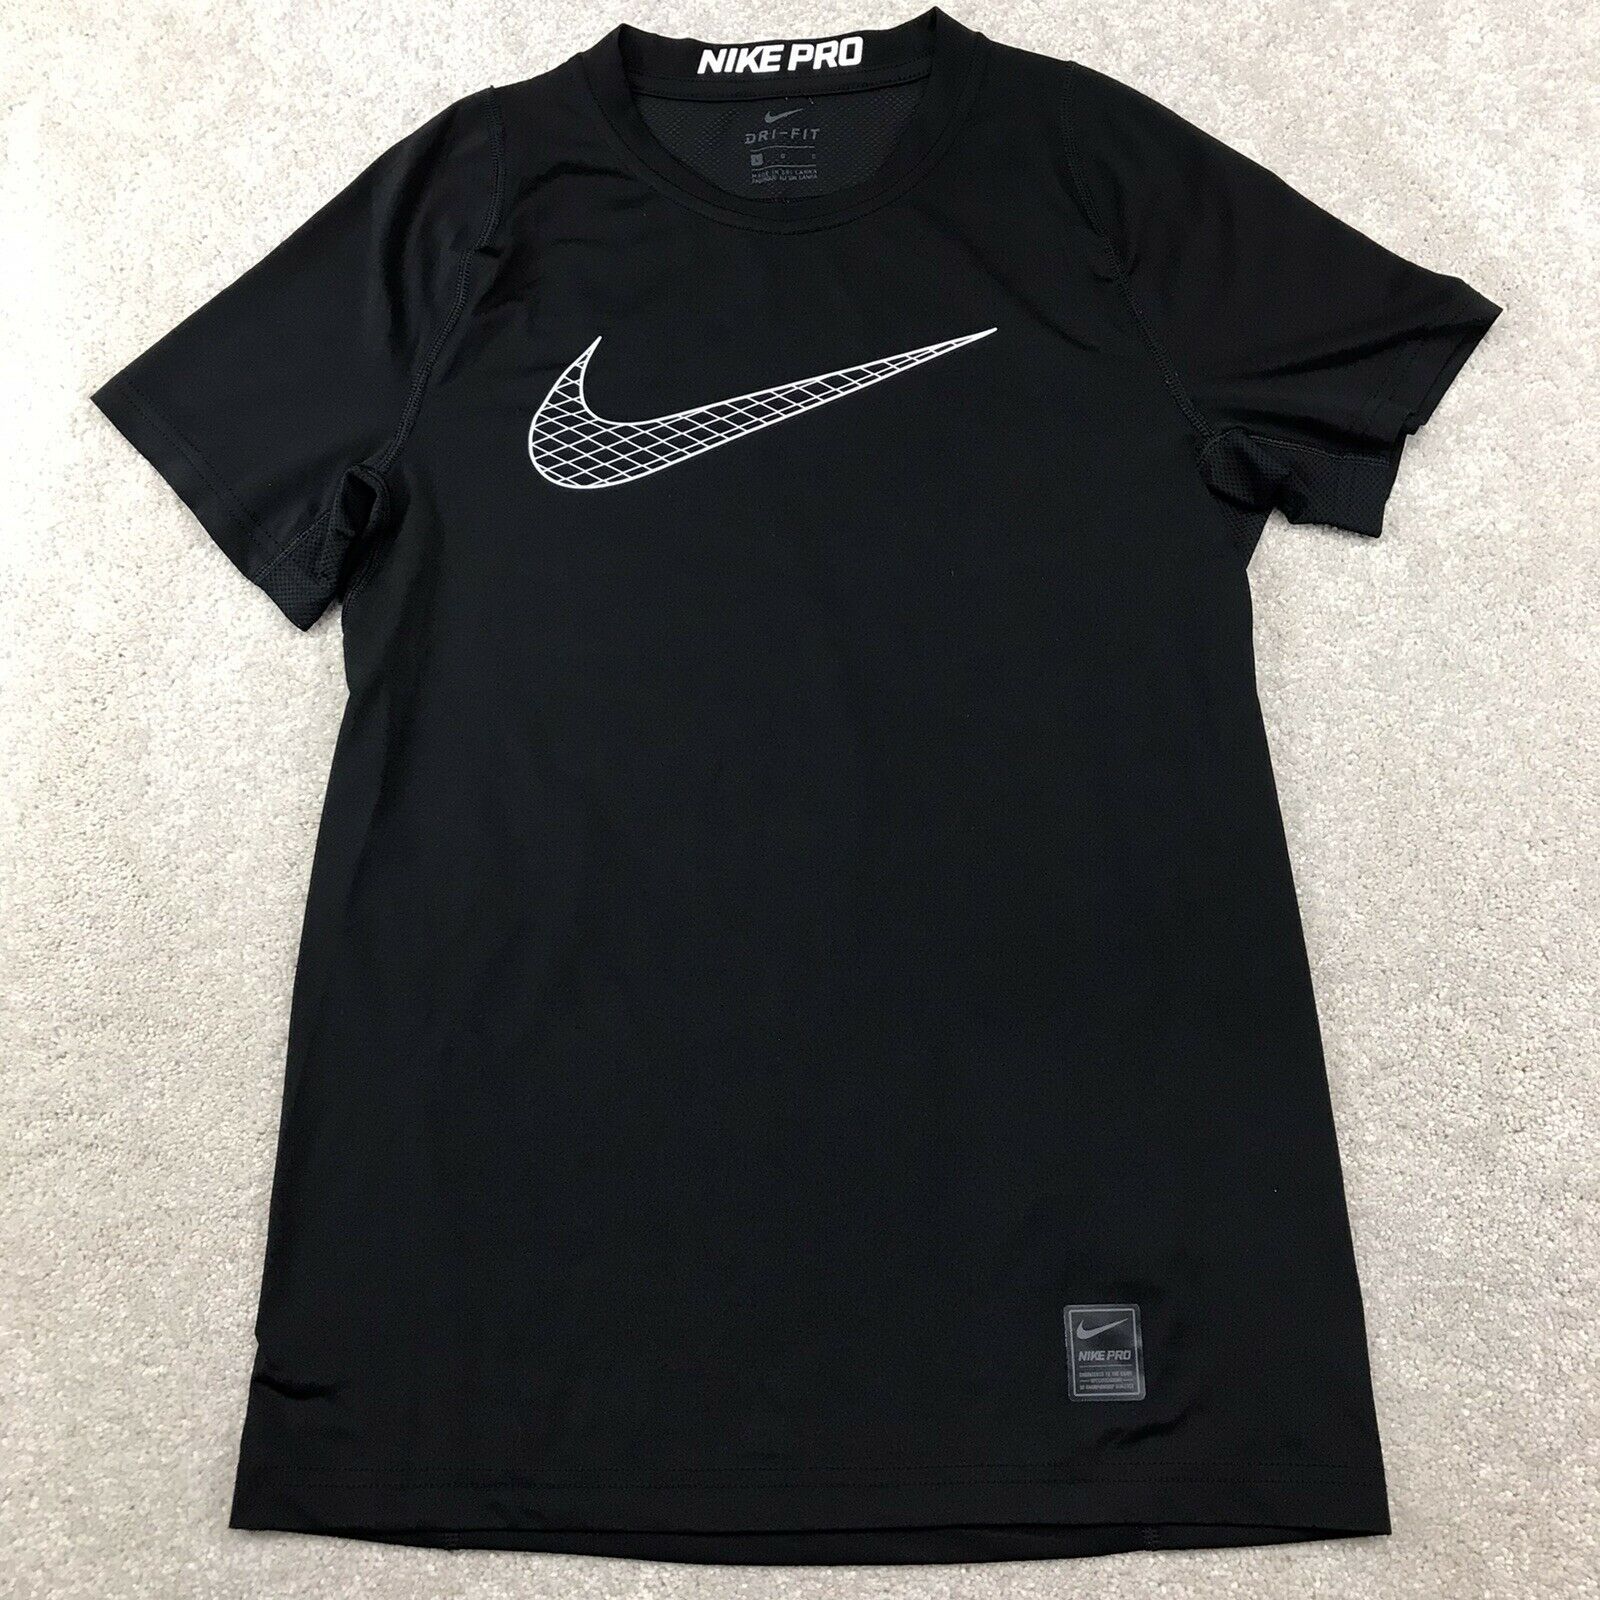 Nike Pro Shirt Youth Size Large L Fitted Black Dry Fit Tee Short Sleeve Swoosh